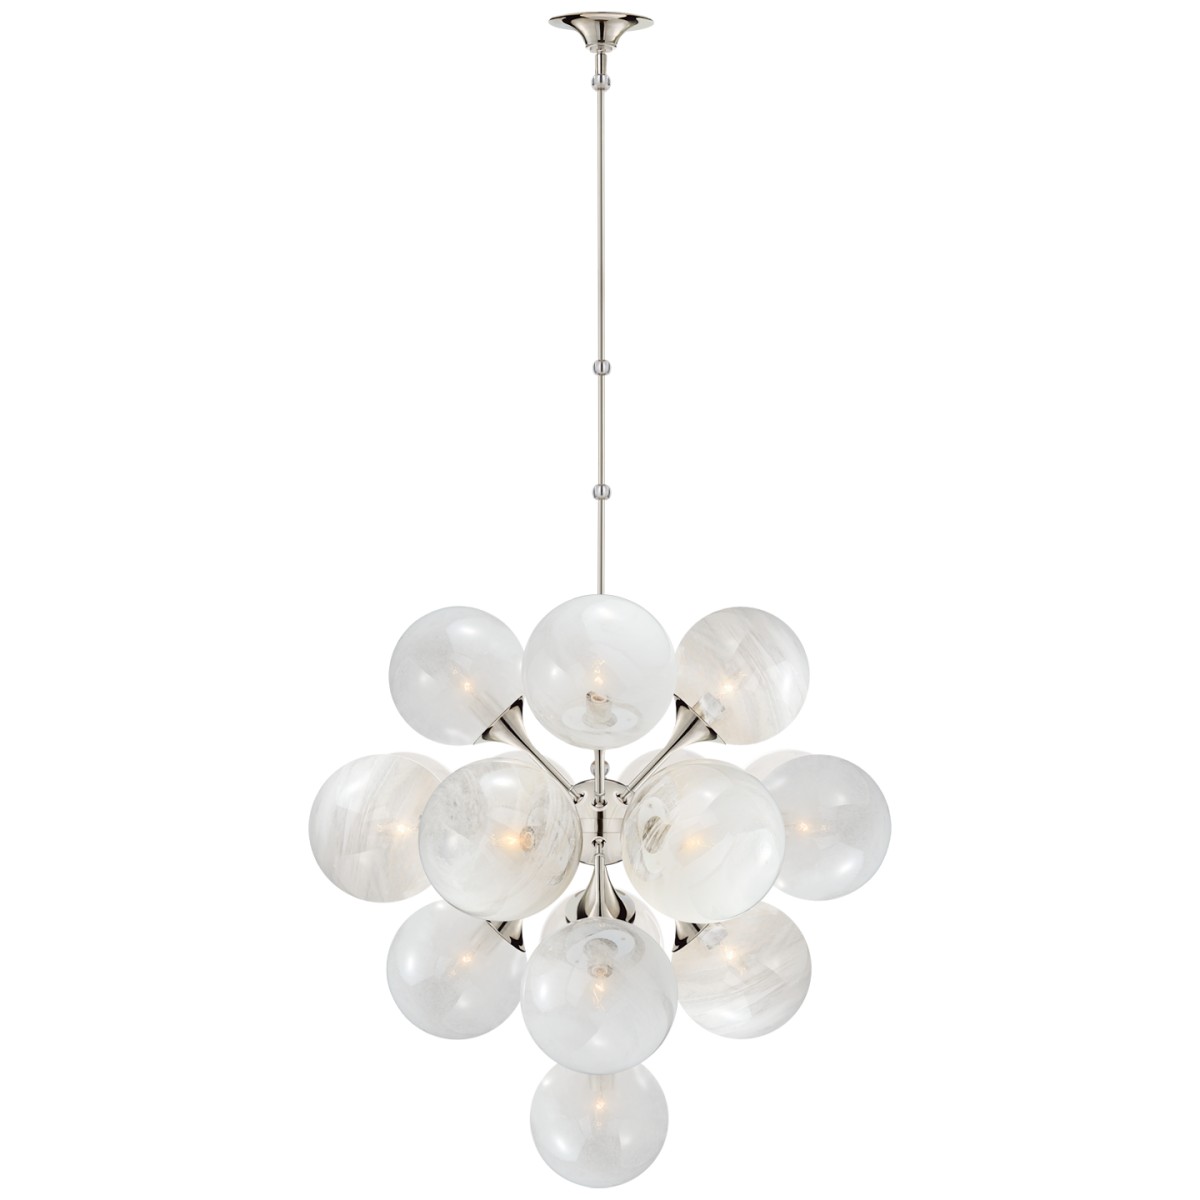 Cristol Large Tiered Chandelier With White Strie Glass